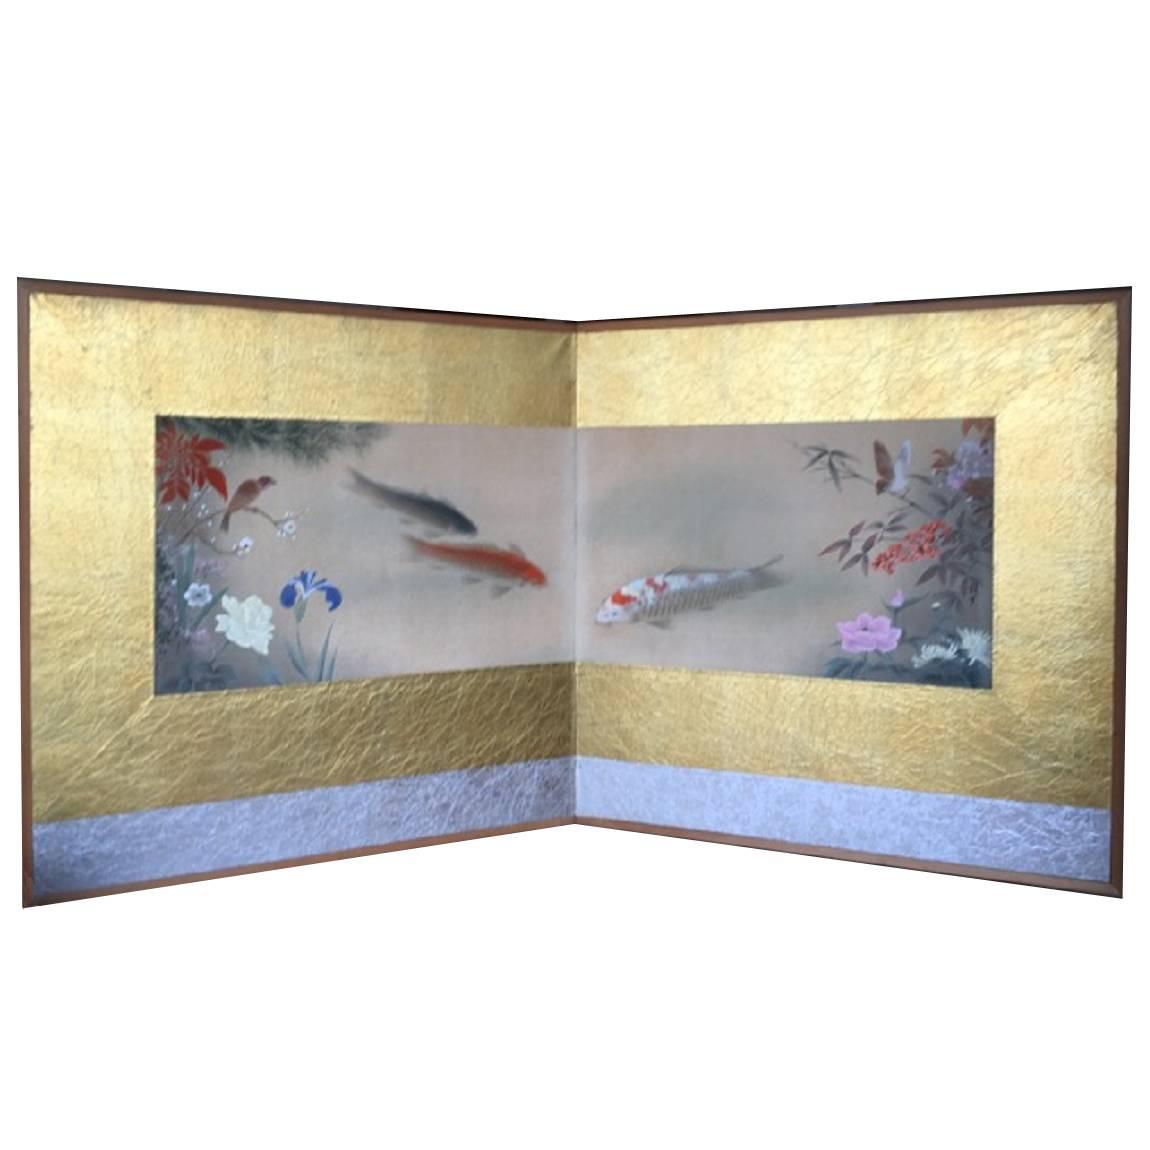 Japanese Antique Screen Koi Fish Flowers Birds blue, red, green FREE SHIPPING